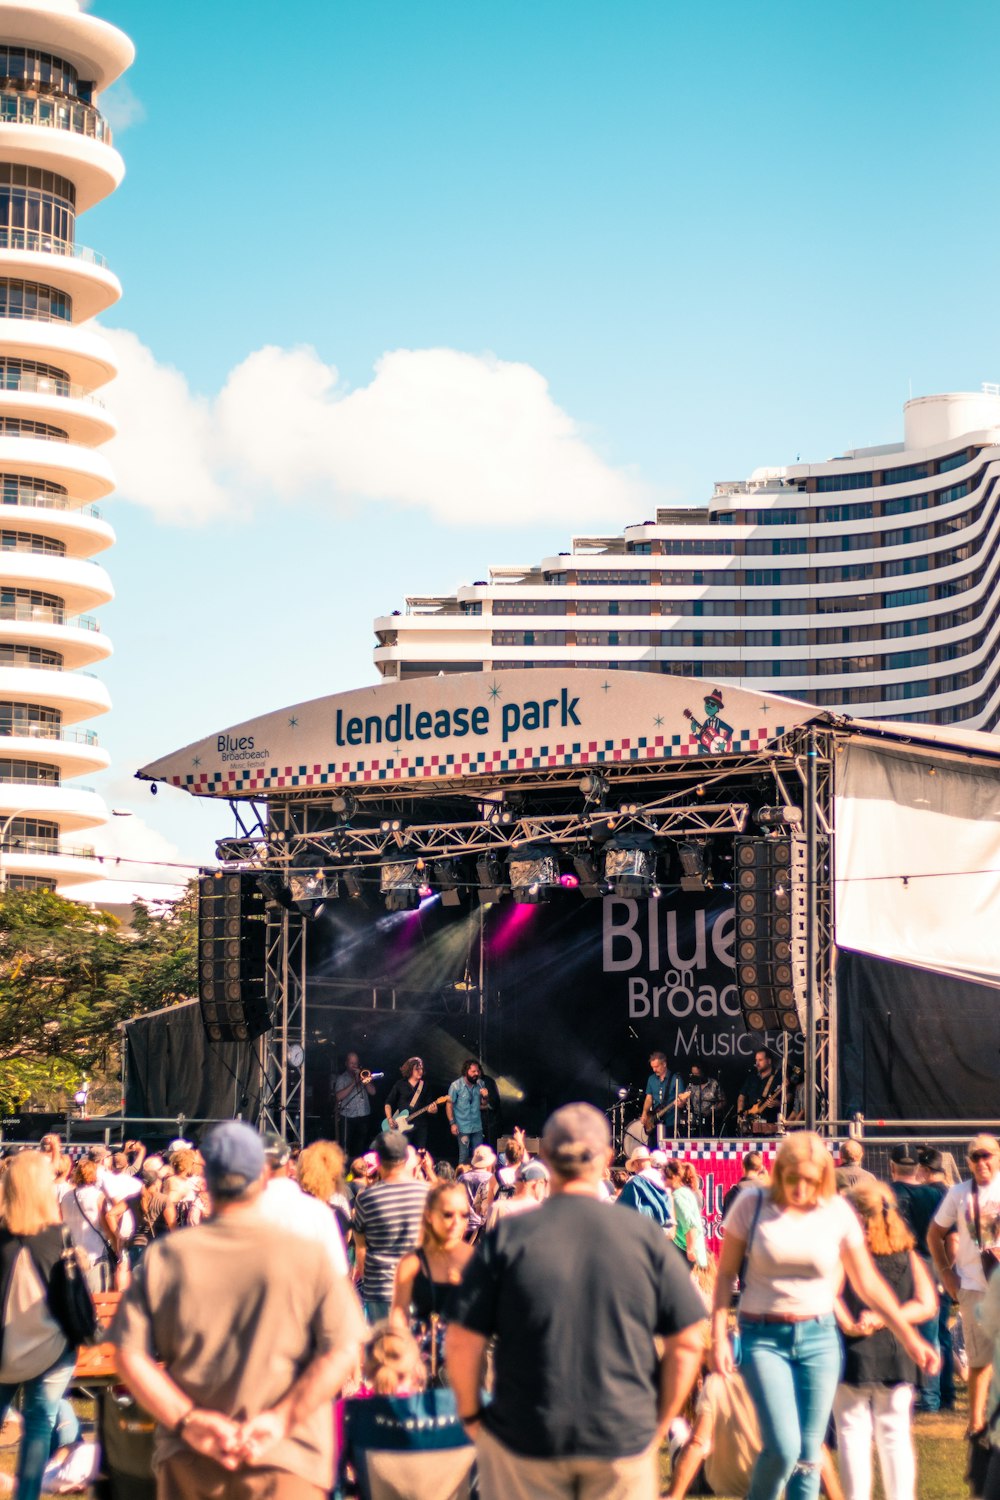 people at Lendlease park having concerts during daytime